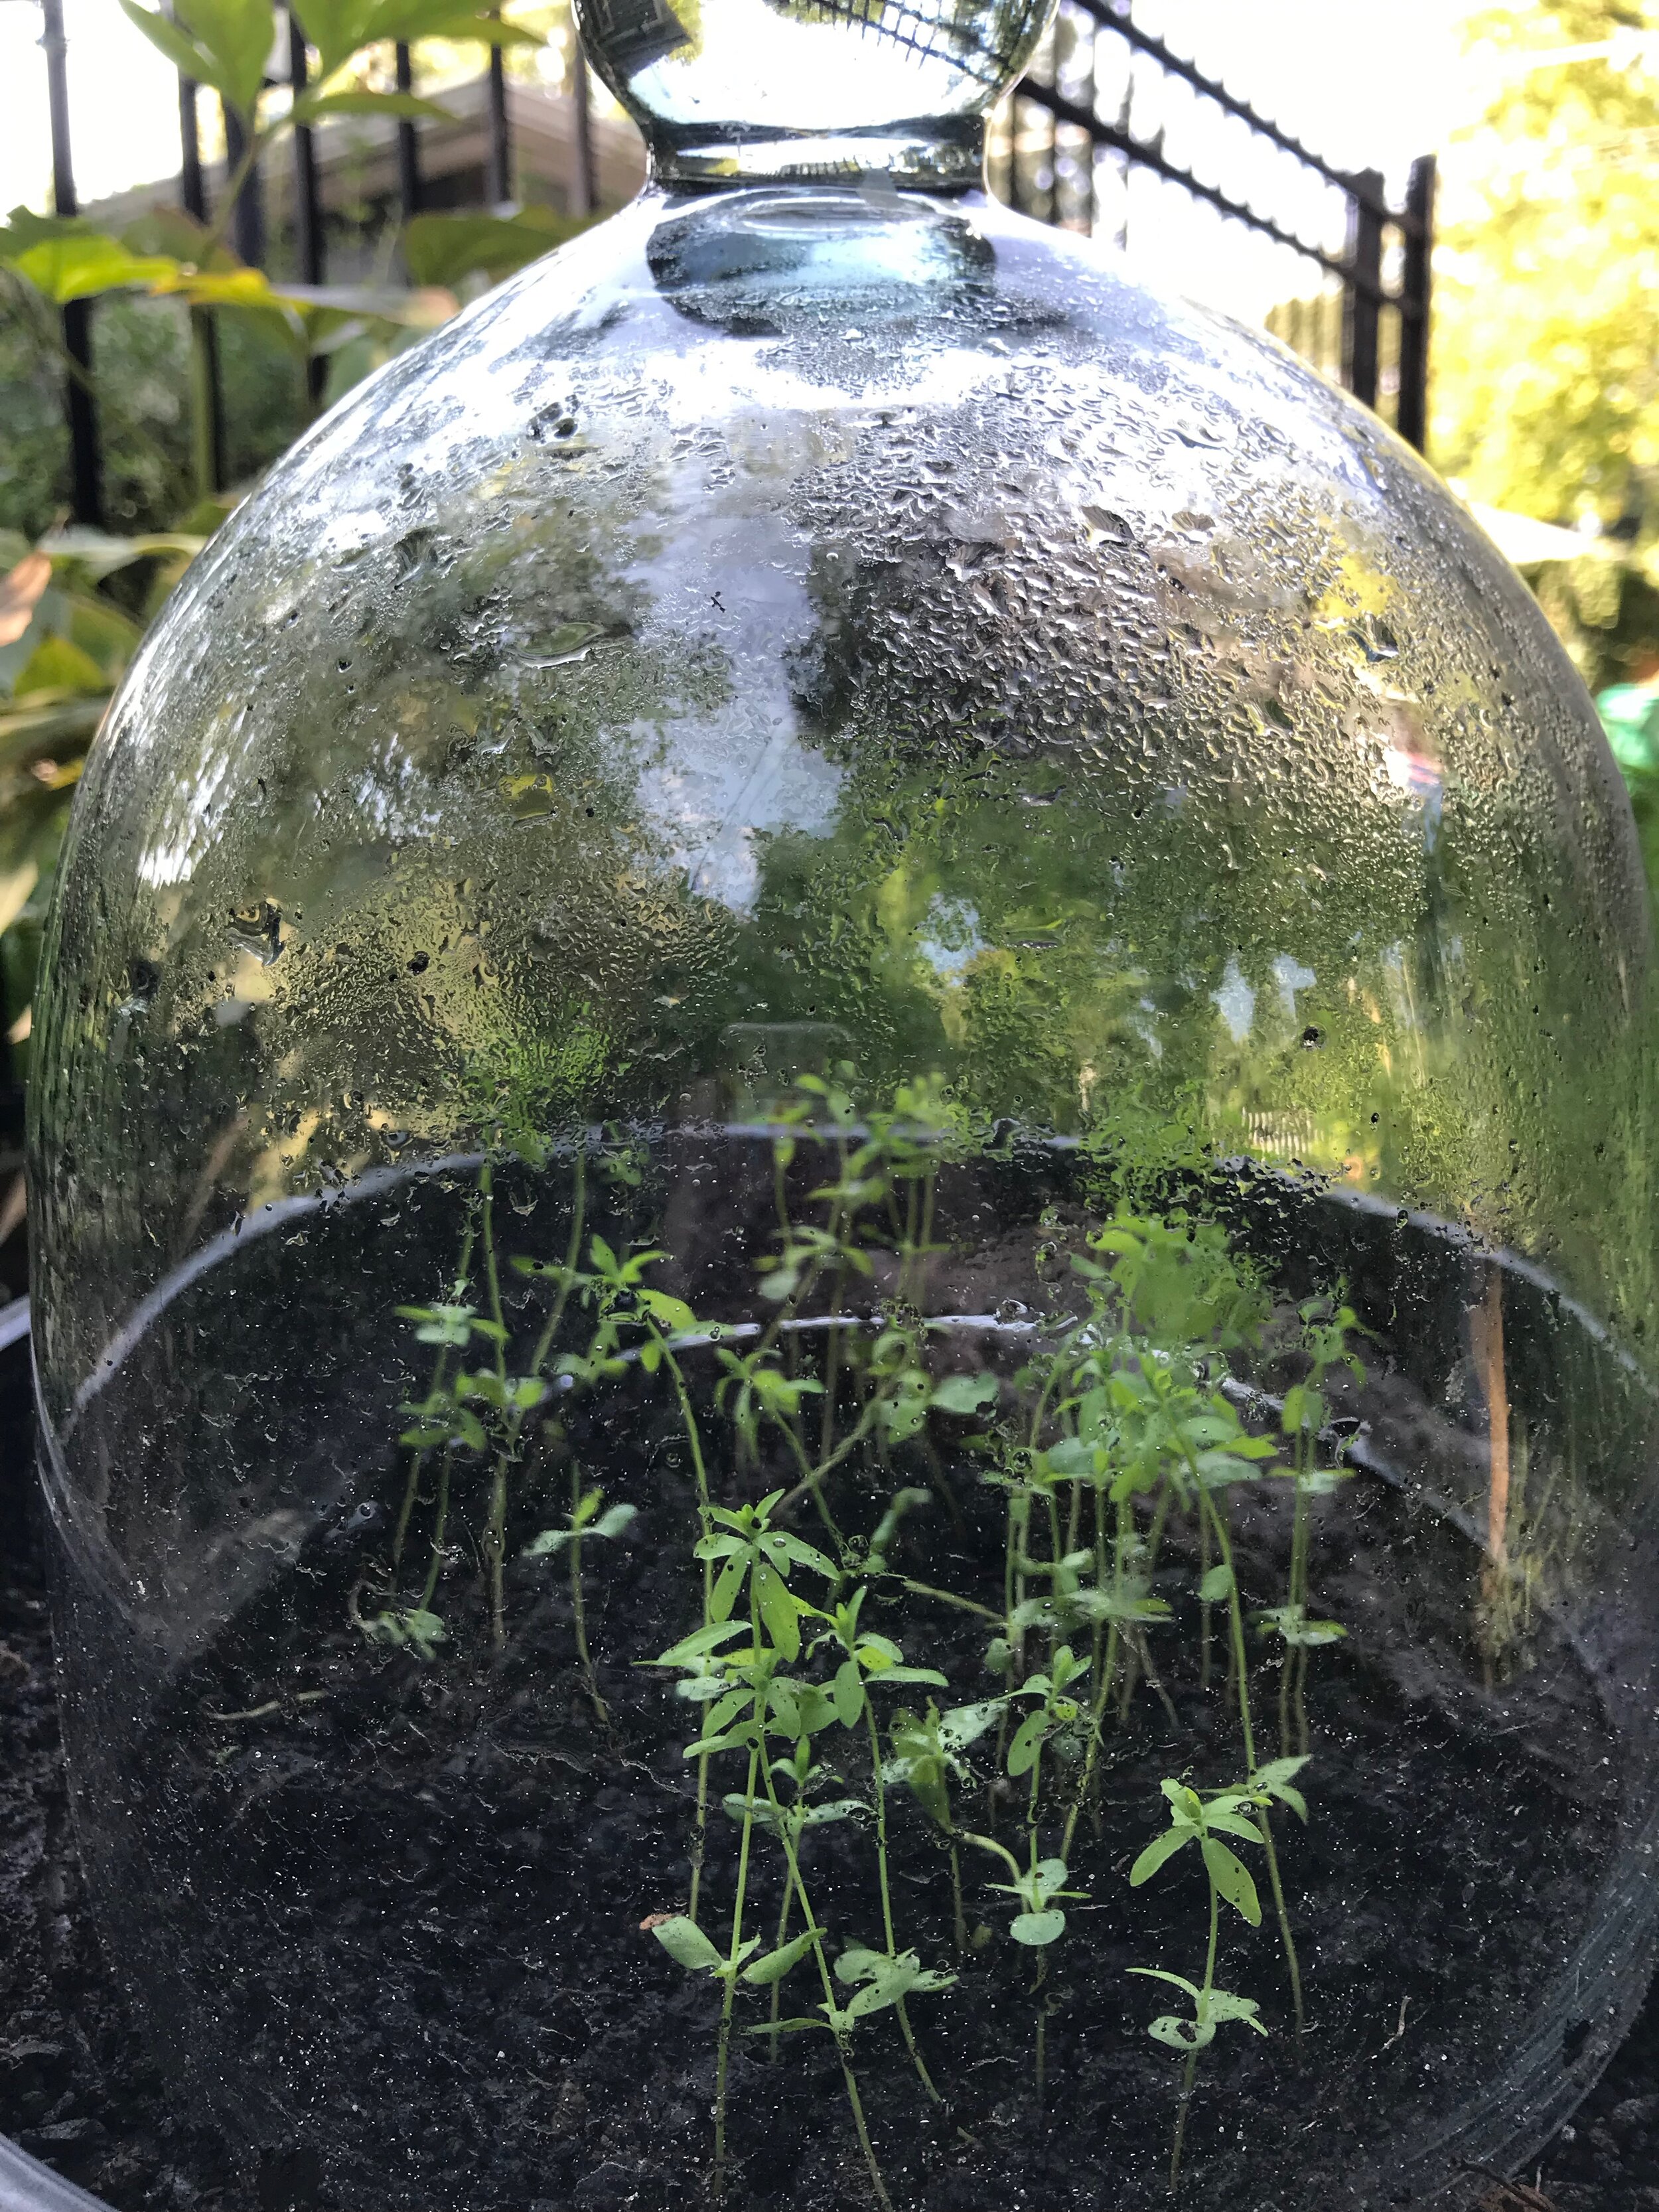   Flax growing in a cloche  